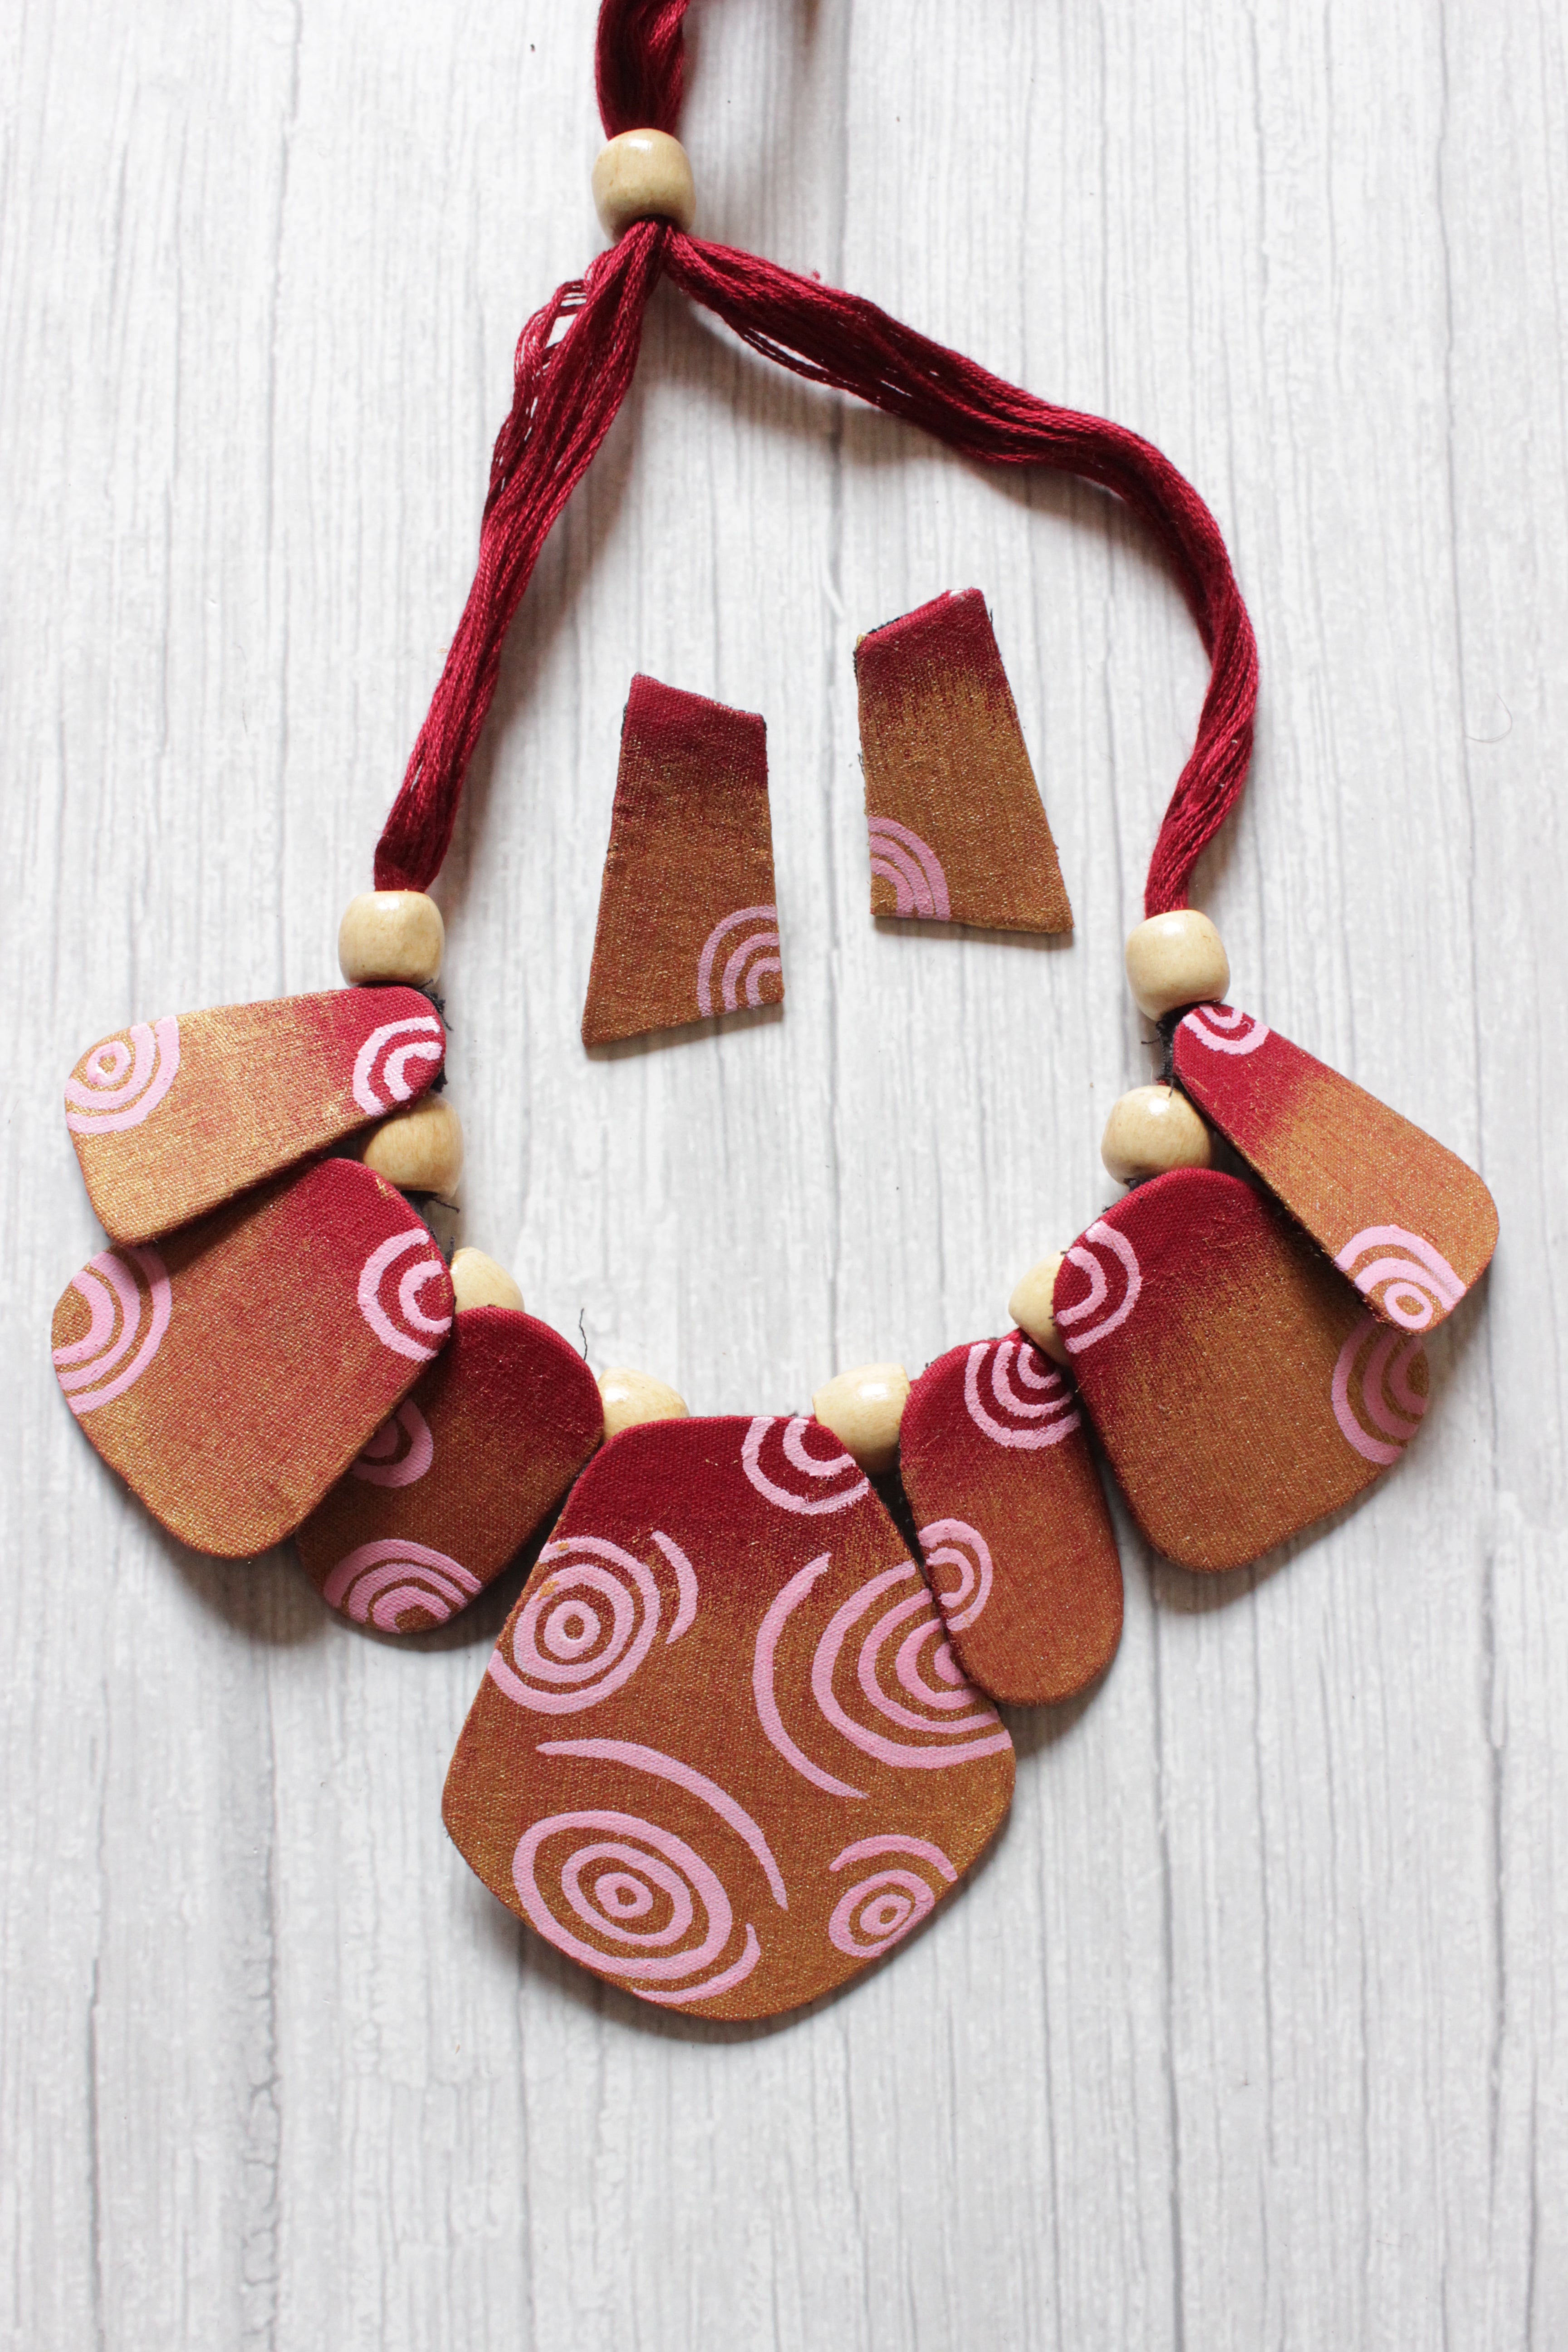 Handmade Fabric and Wooden Beads Necklace Set